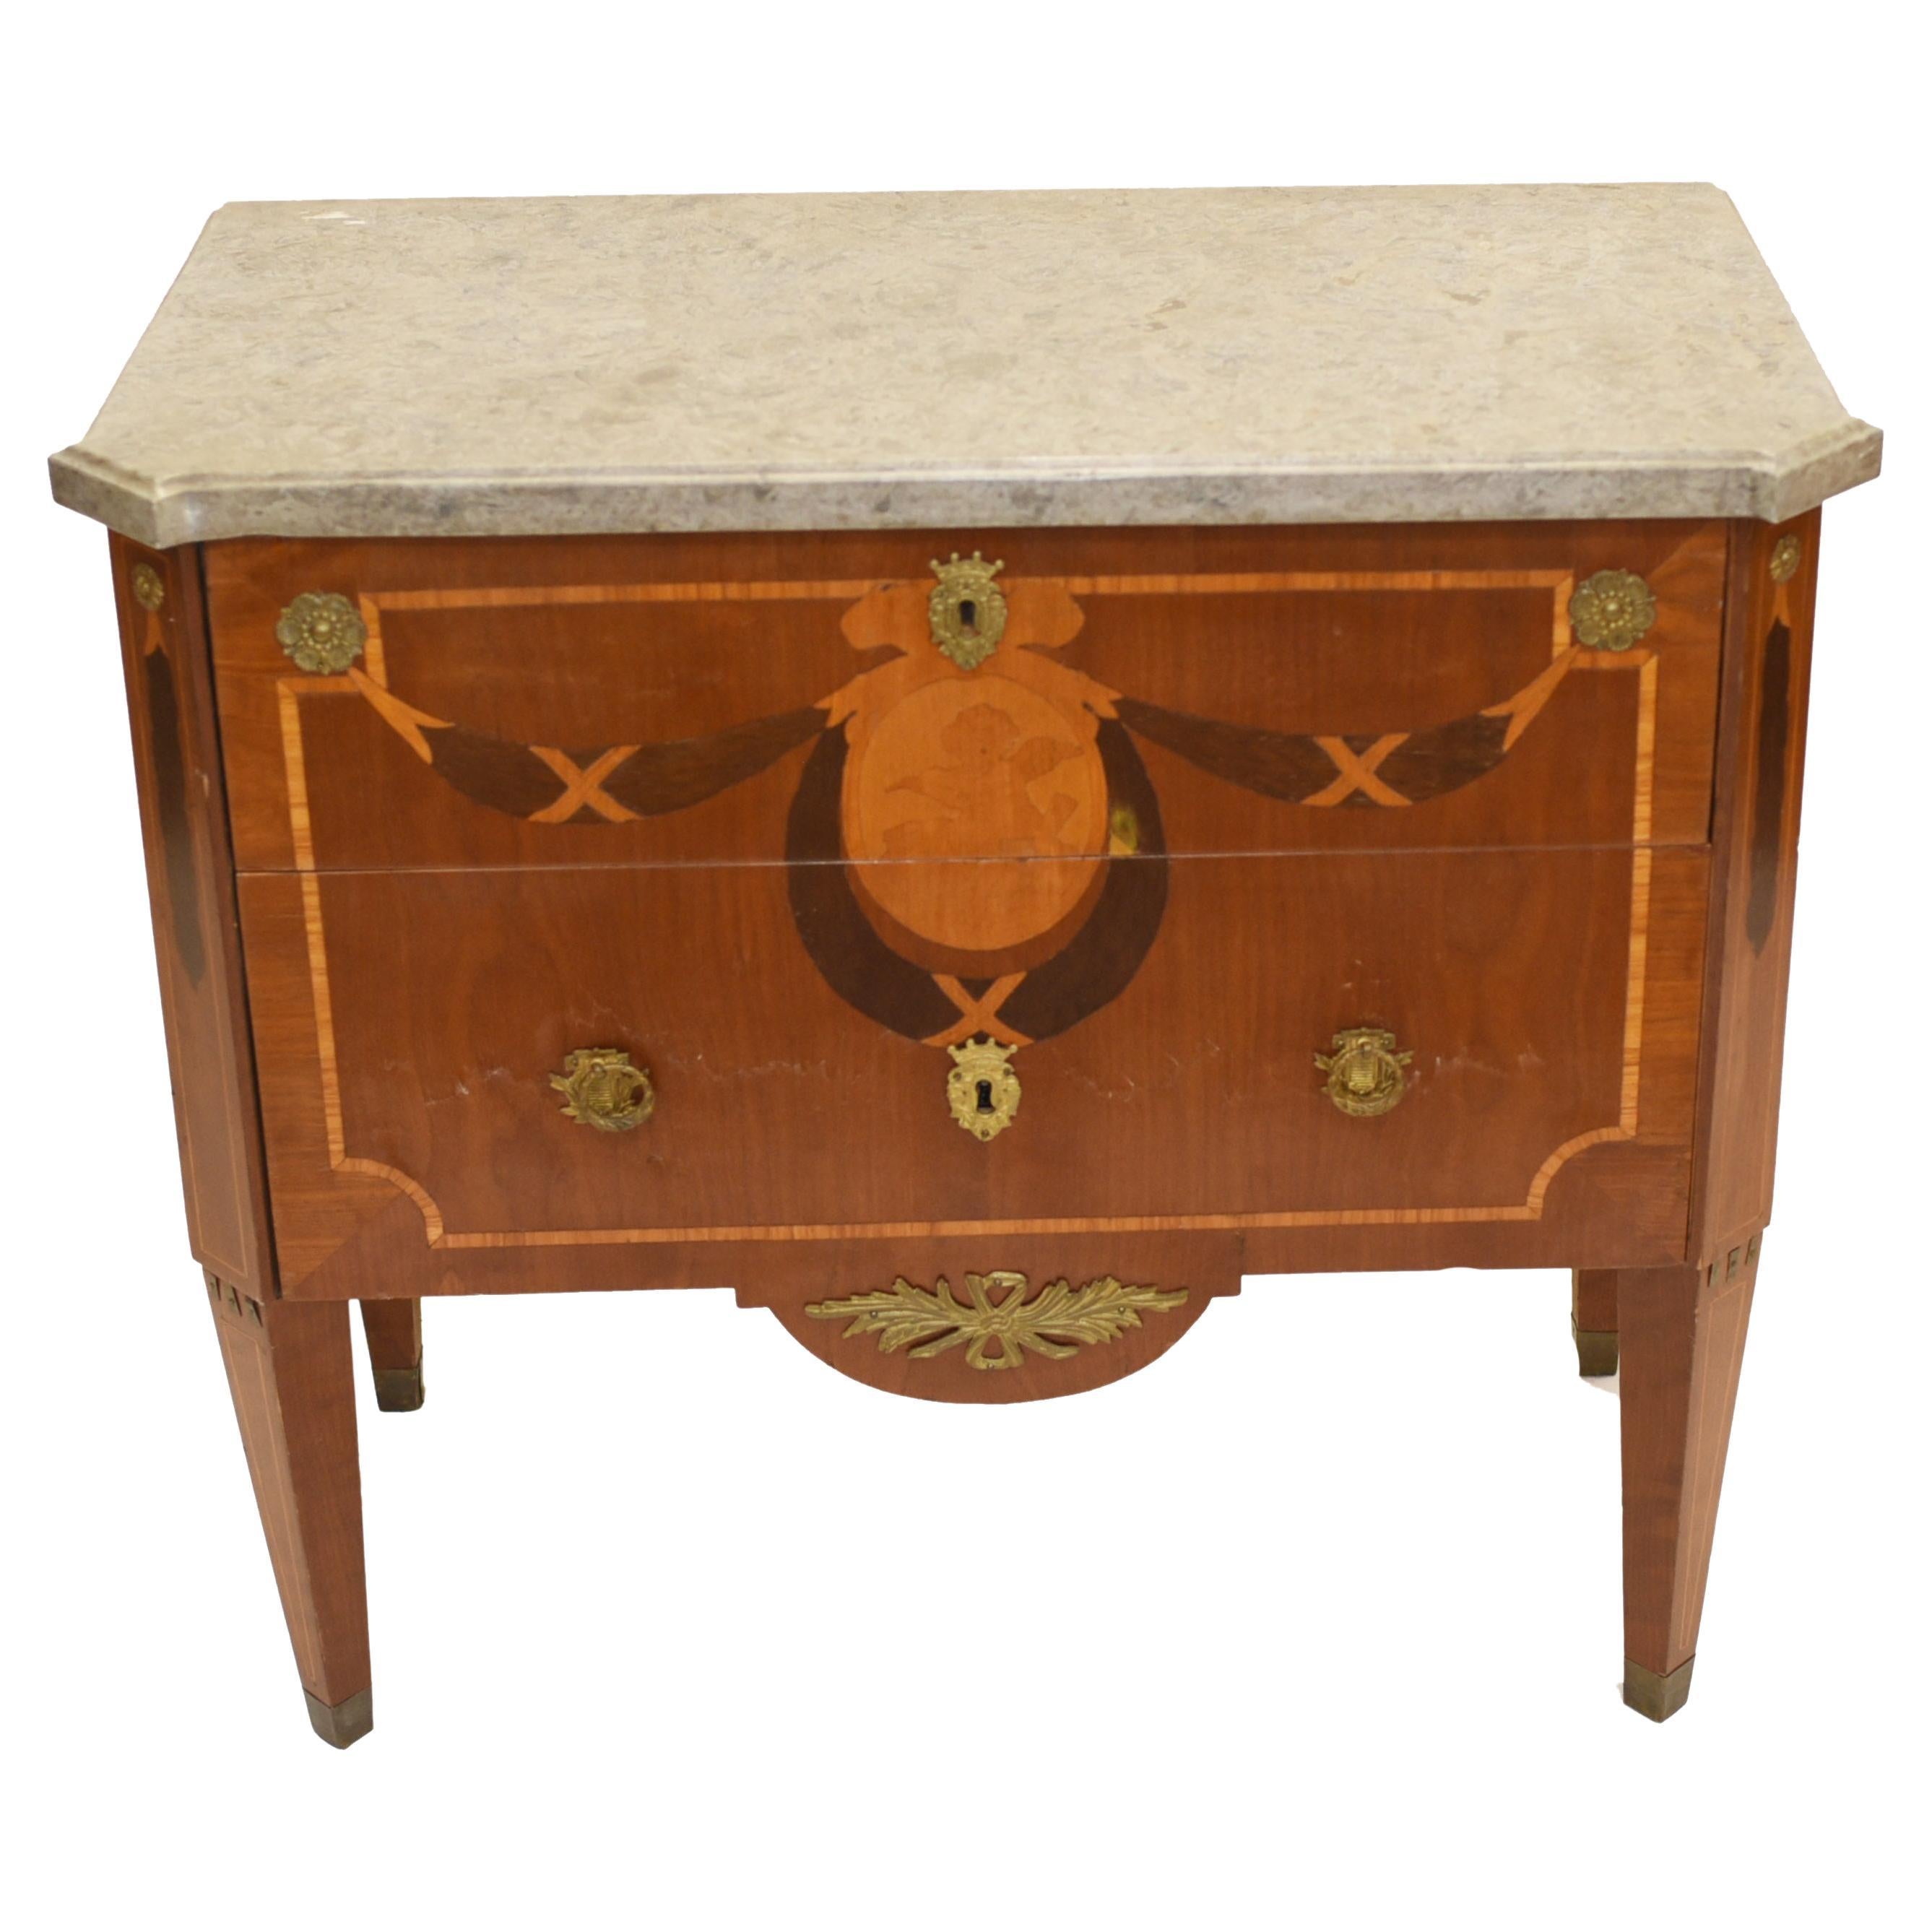 French Empire Commode Chest of Drawers, Antique with Marquetry Inlay